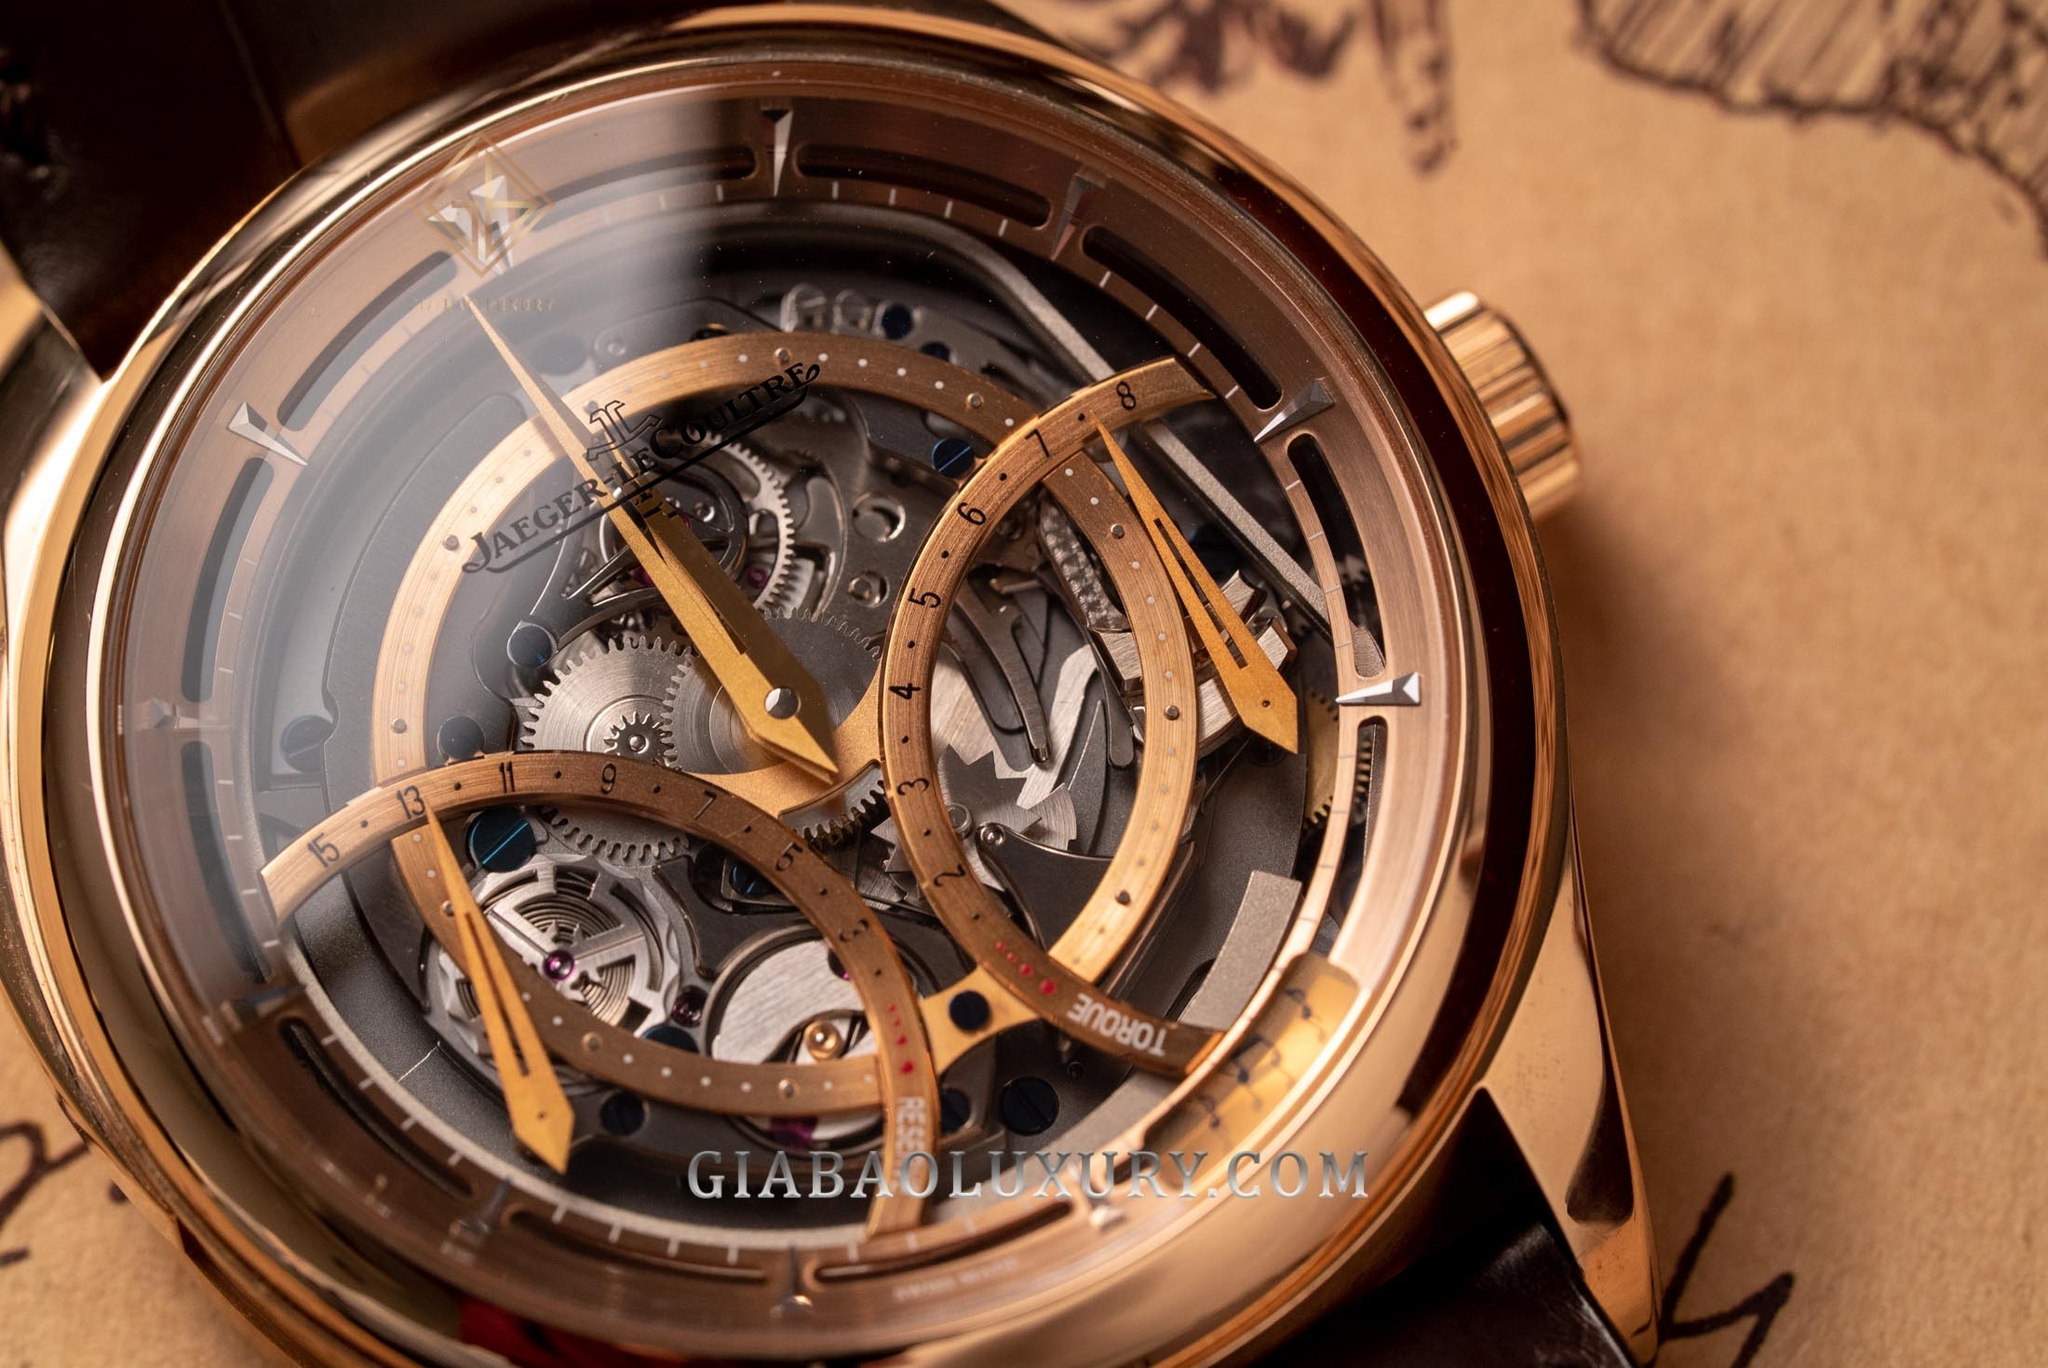  Đồng hồ Jaeger-LeCoultre Grande Tradition Minute Repeater